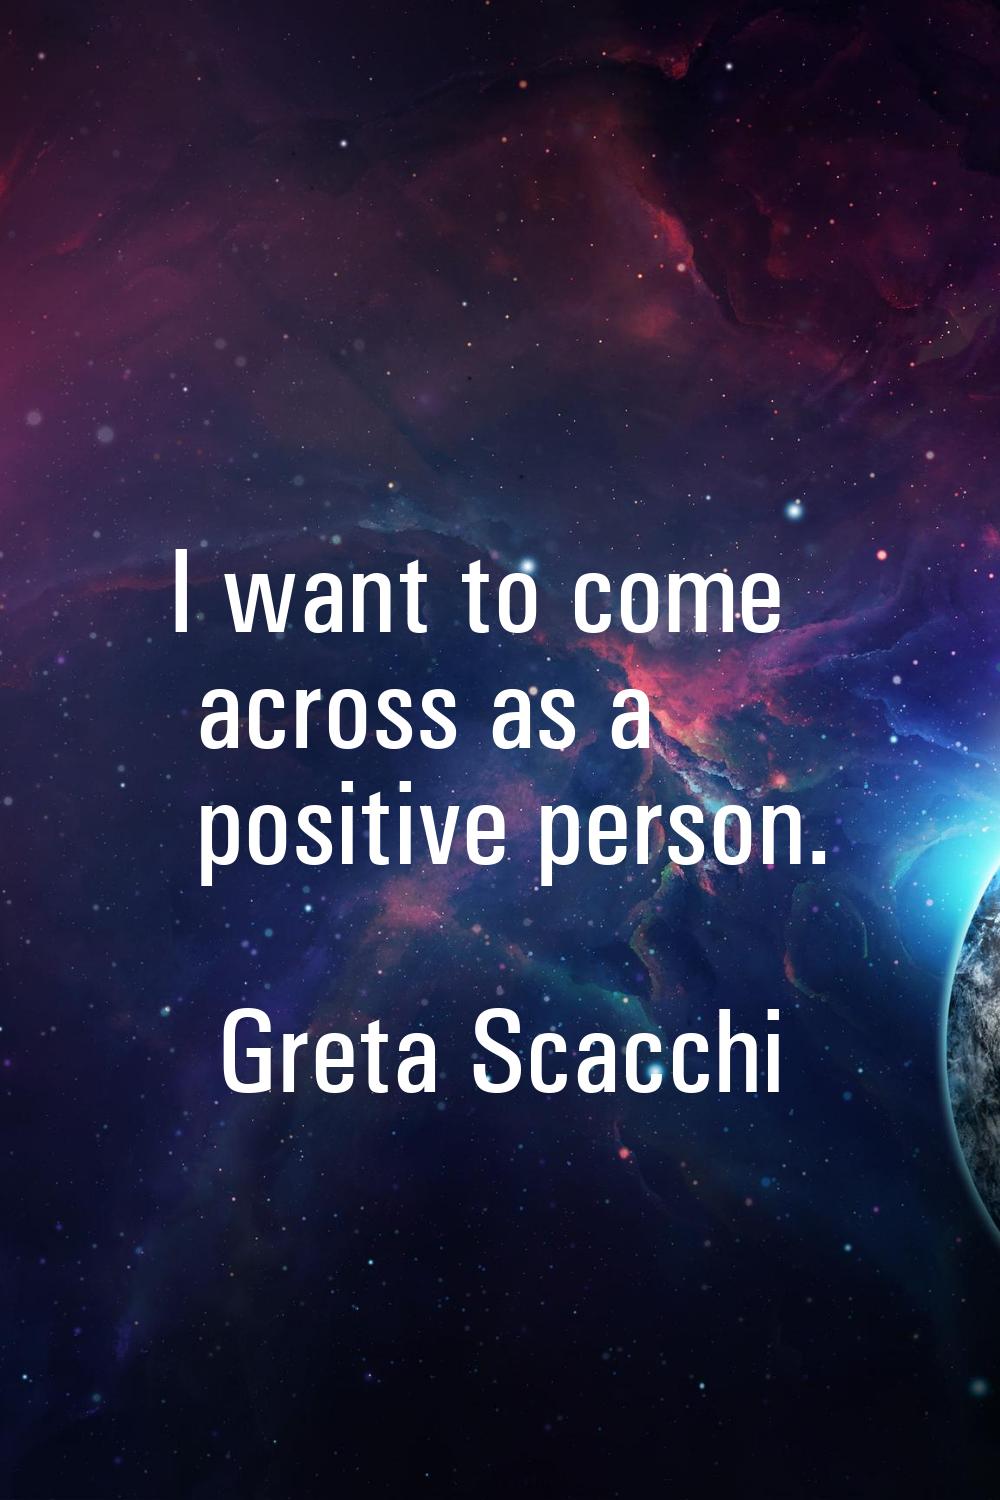 I want to come across as a positive person.